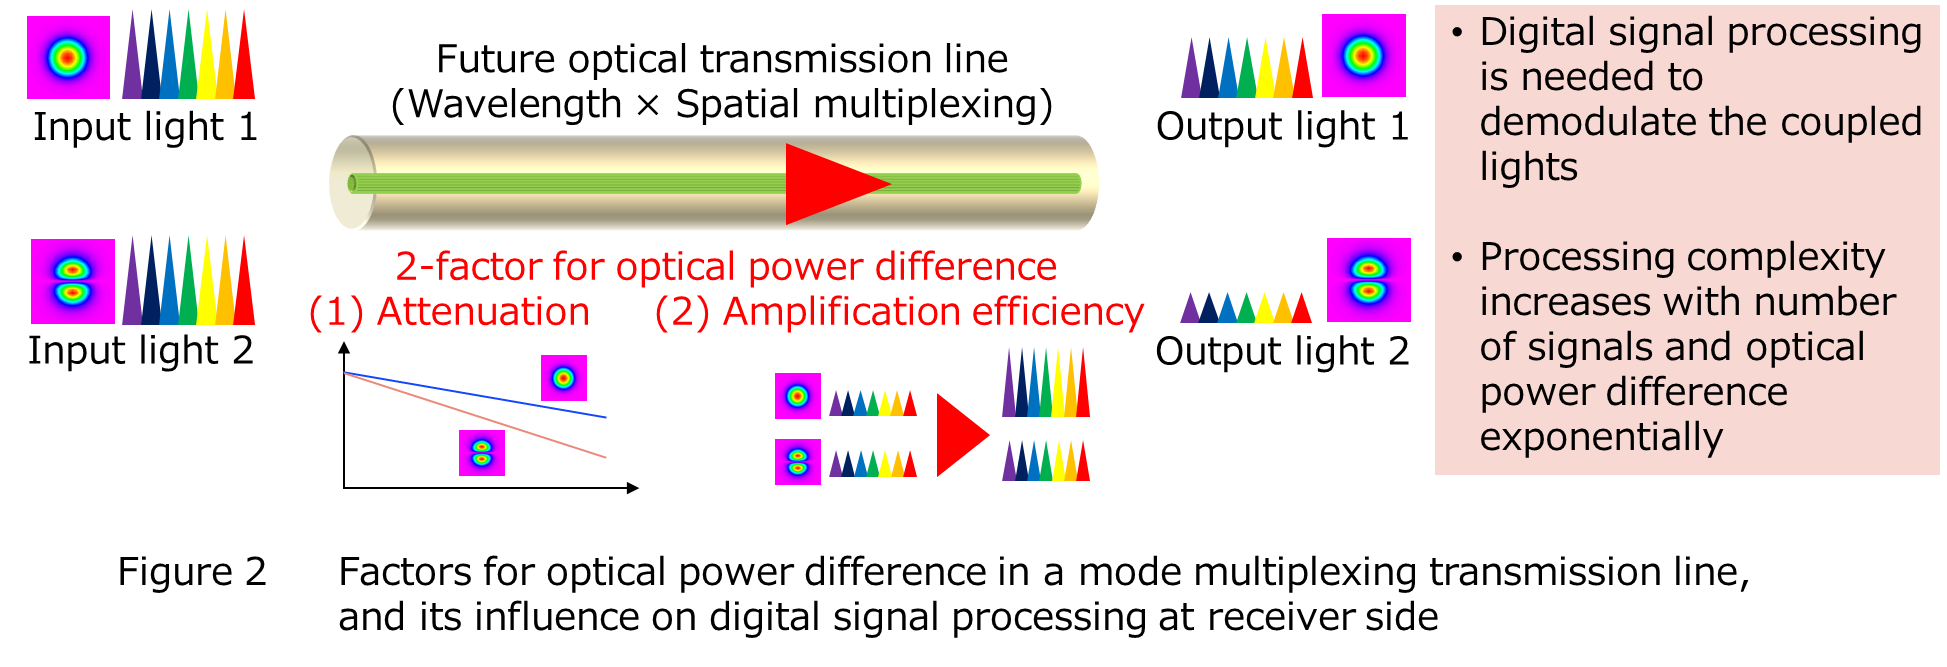 Figure 2 Factors for optical power difference in a mode multiplexing transmission line, and its influence on digital signal processing at receiver side